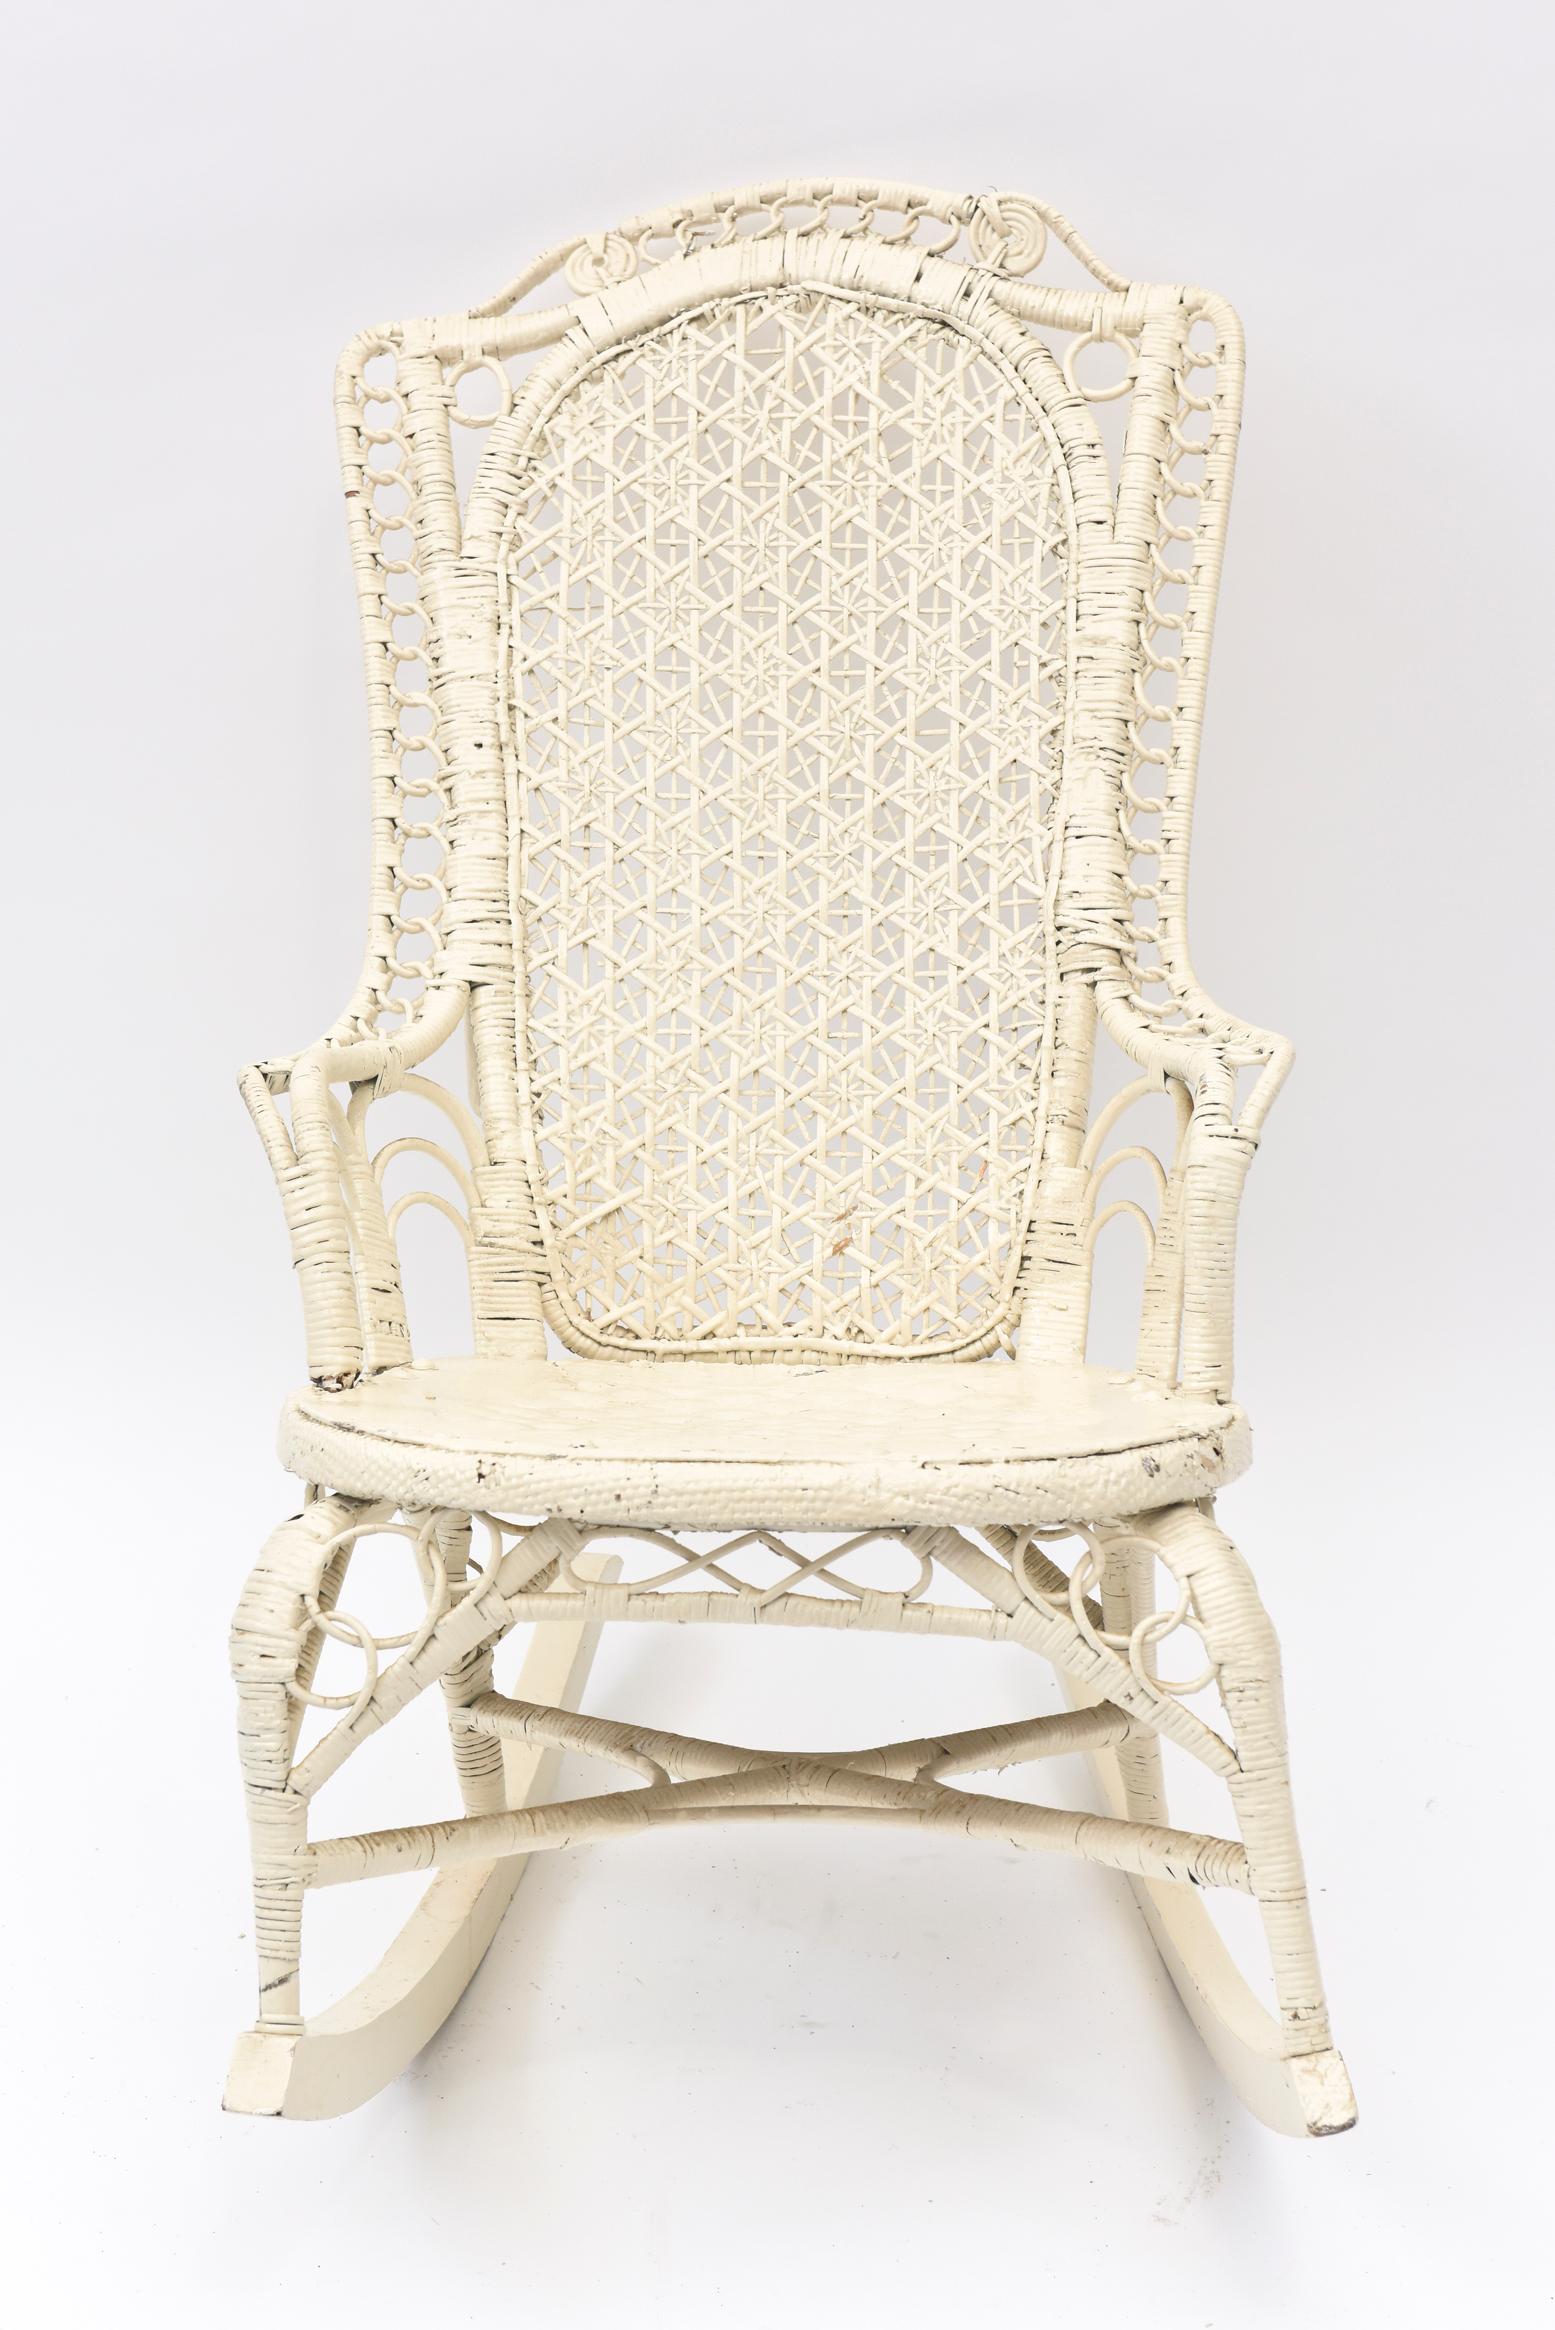 This Victorian ladies rocker matches the youth chair we have also listed. The arms and back are high Victorian style. It was probably a mother's nursery chair perhaps used for nursing her baby. The seat is leather and has been painted white. It is